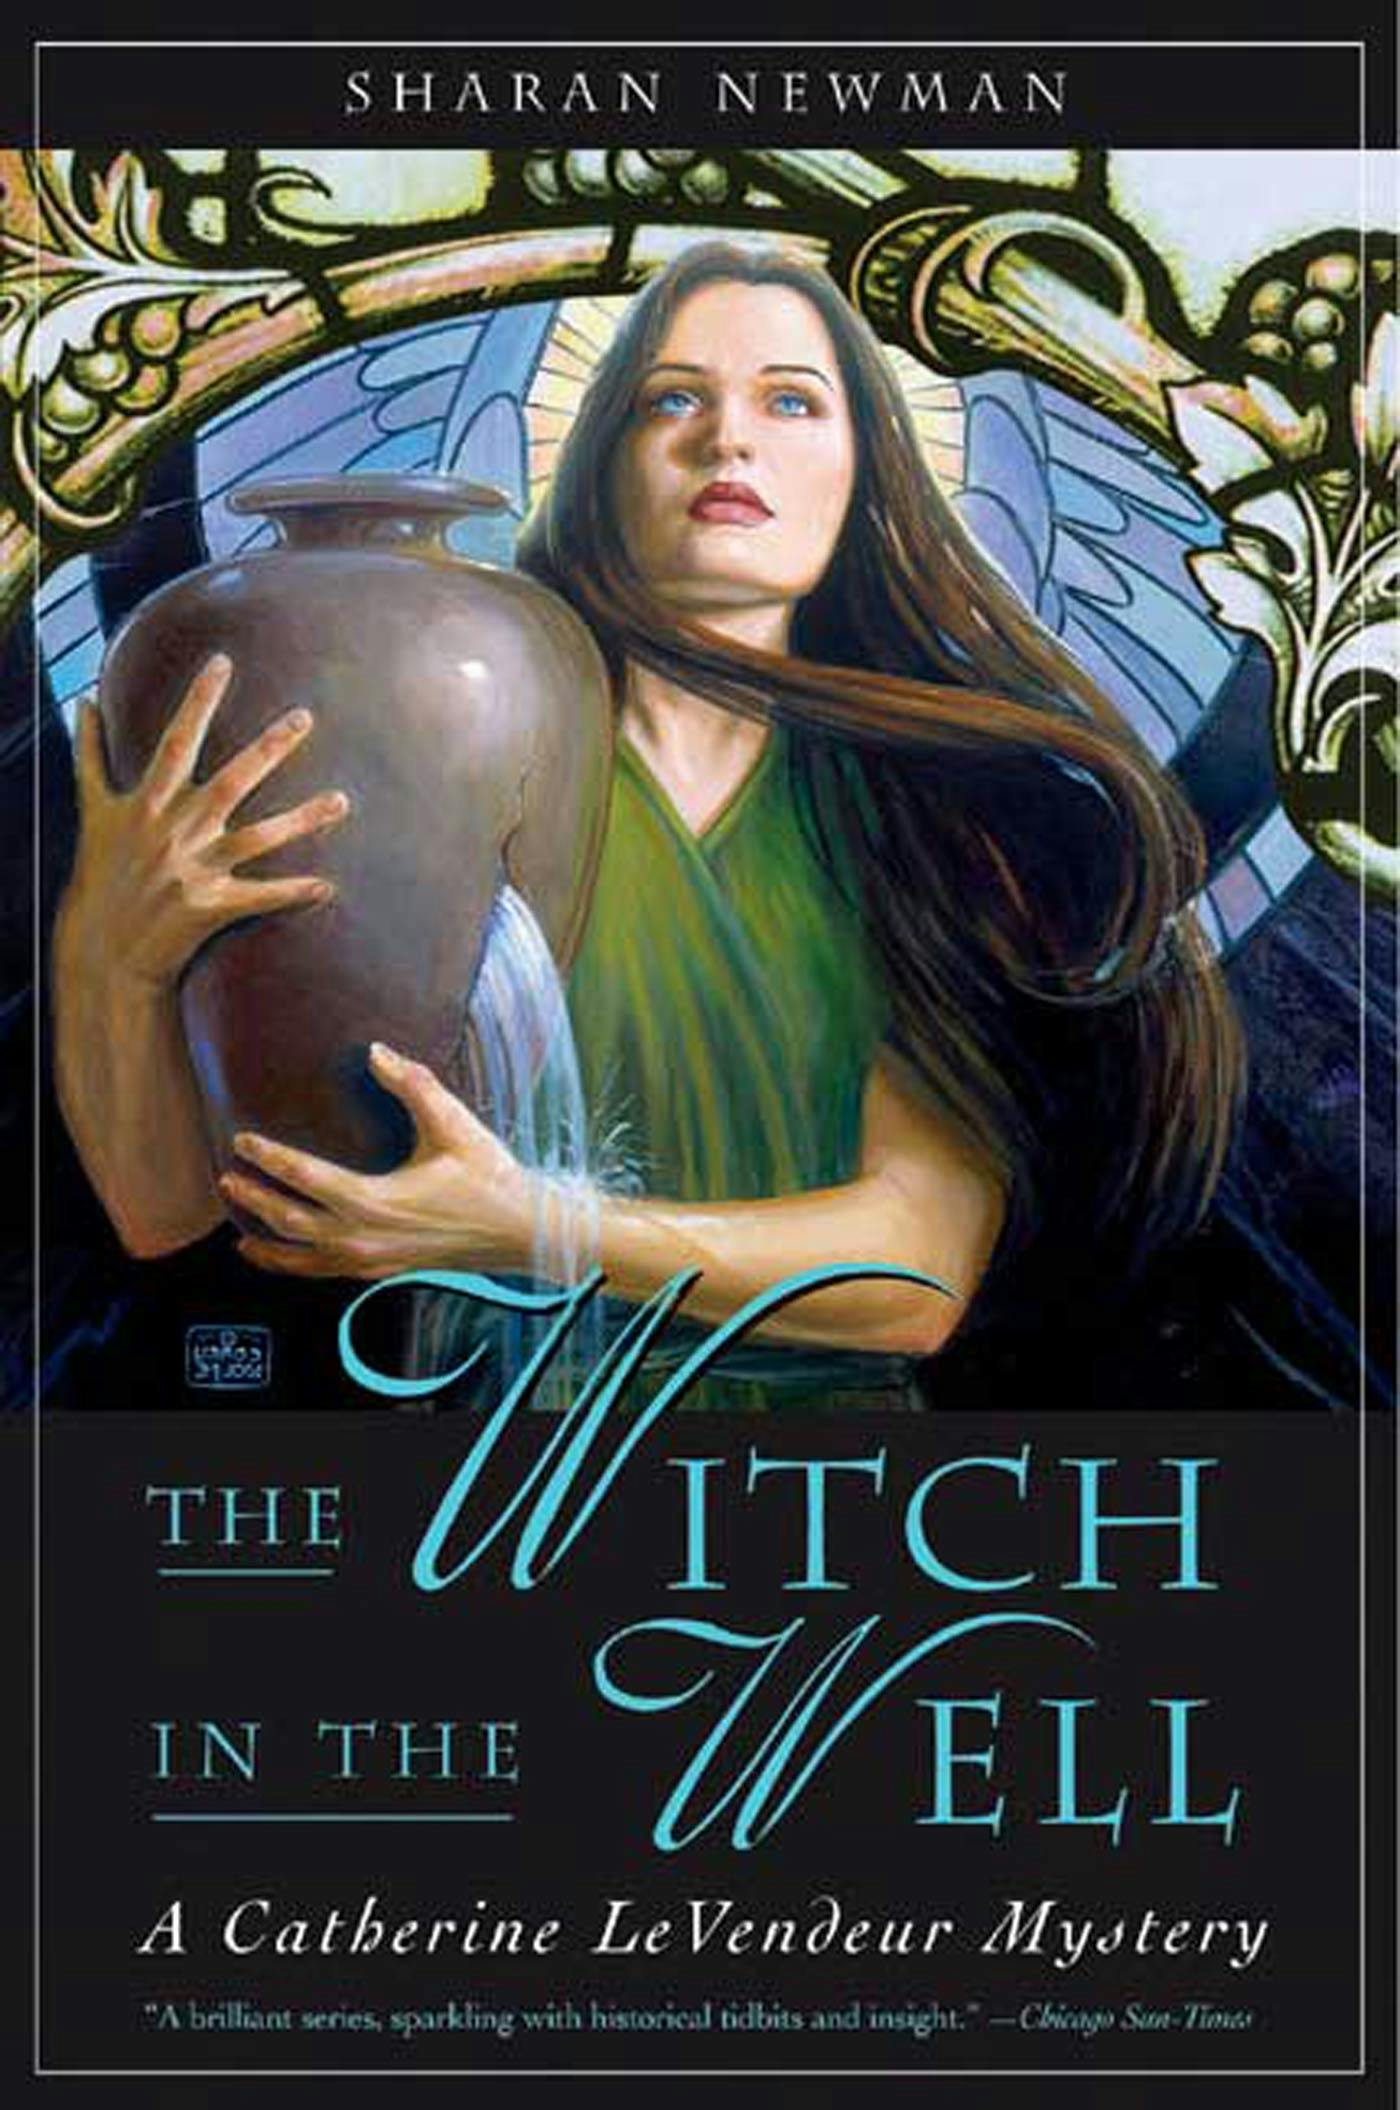 Cover for the book titled as: The Witch in the Well